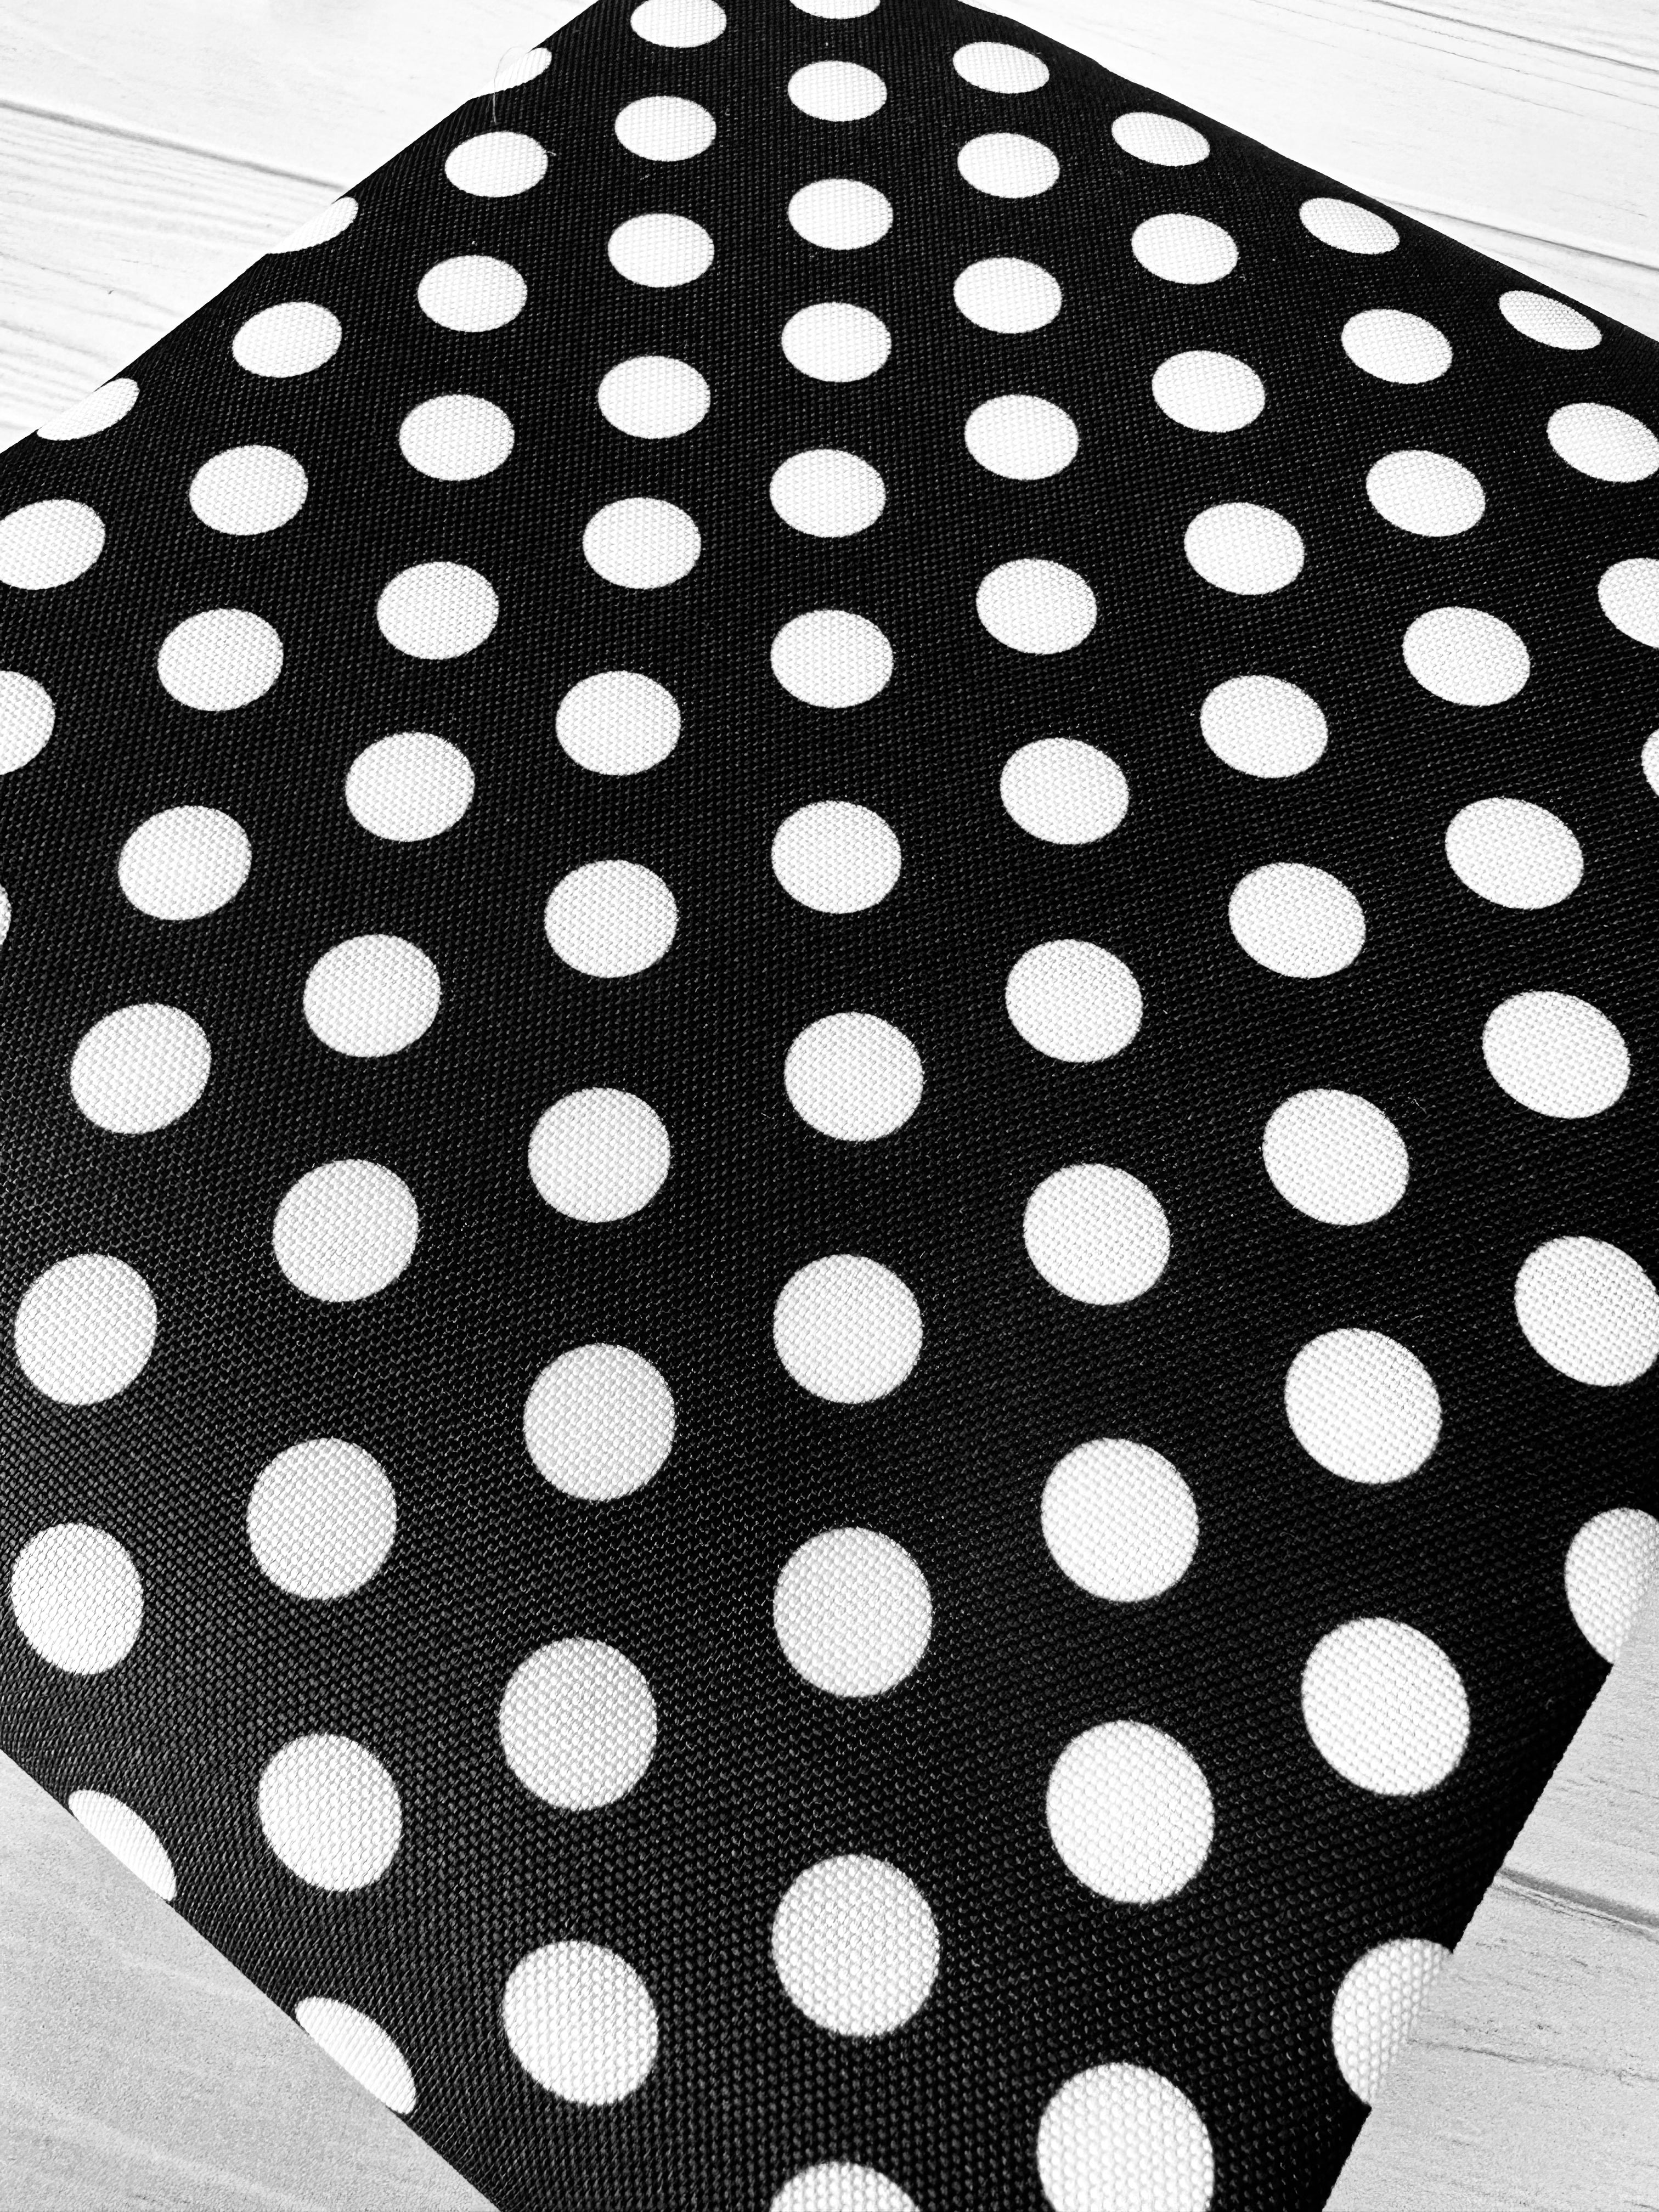 Black and White Polka Dots Waterproof Canvas